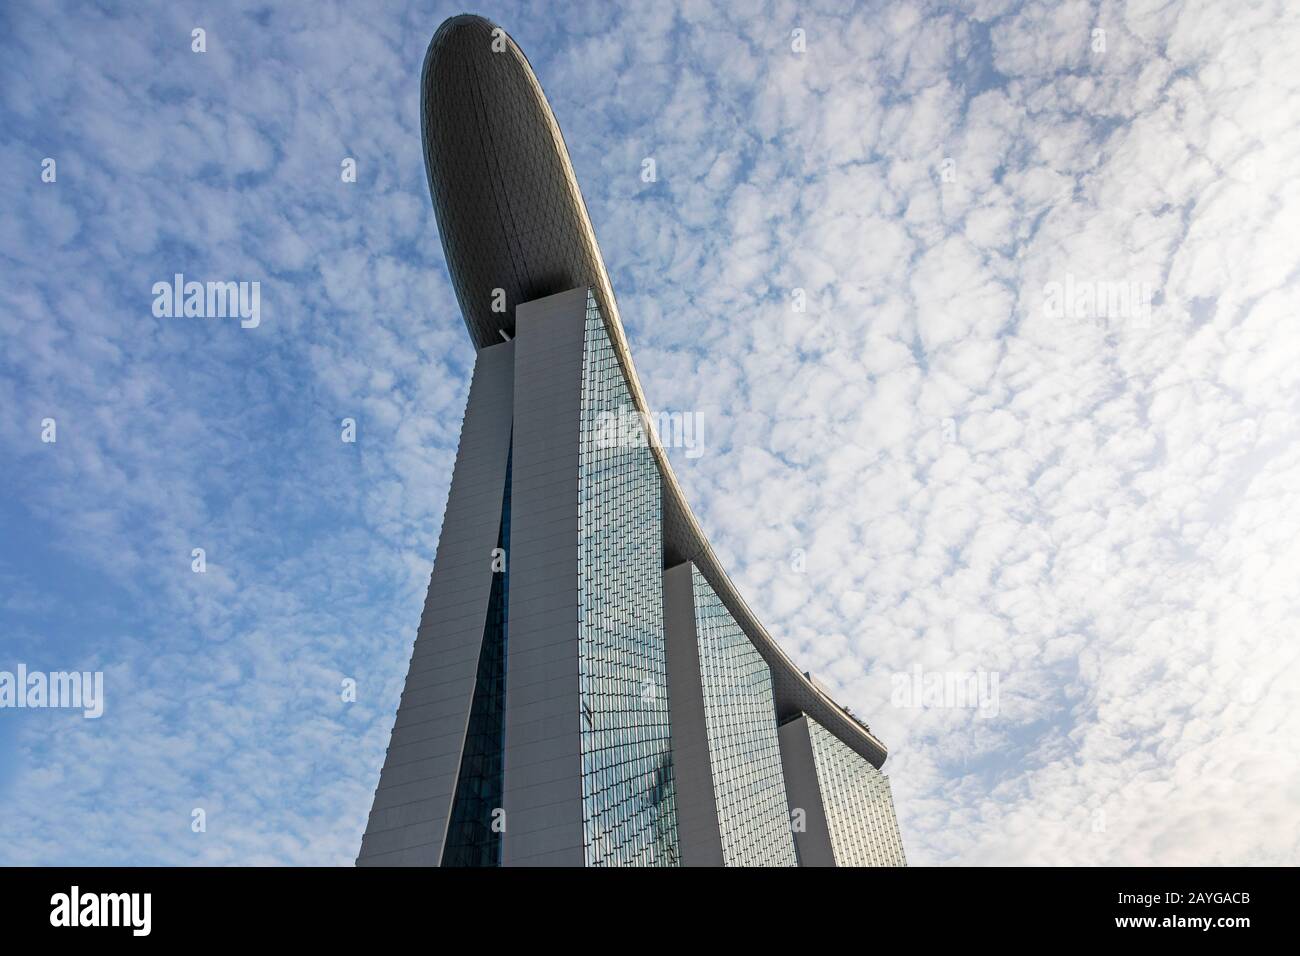 Marina Bay Sands Hotel, Singapore, Asia, with a modern architectural design with a ship shaped viewing platform Stock Photo